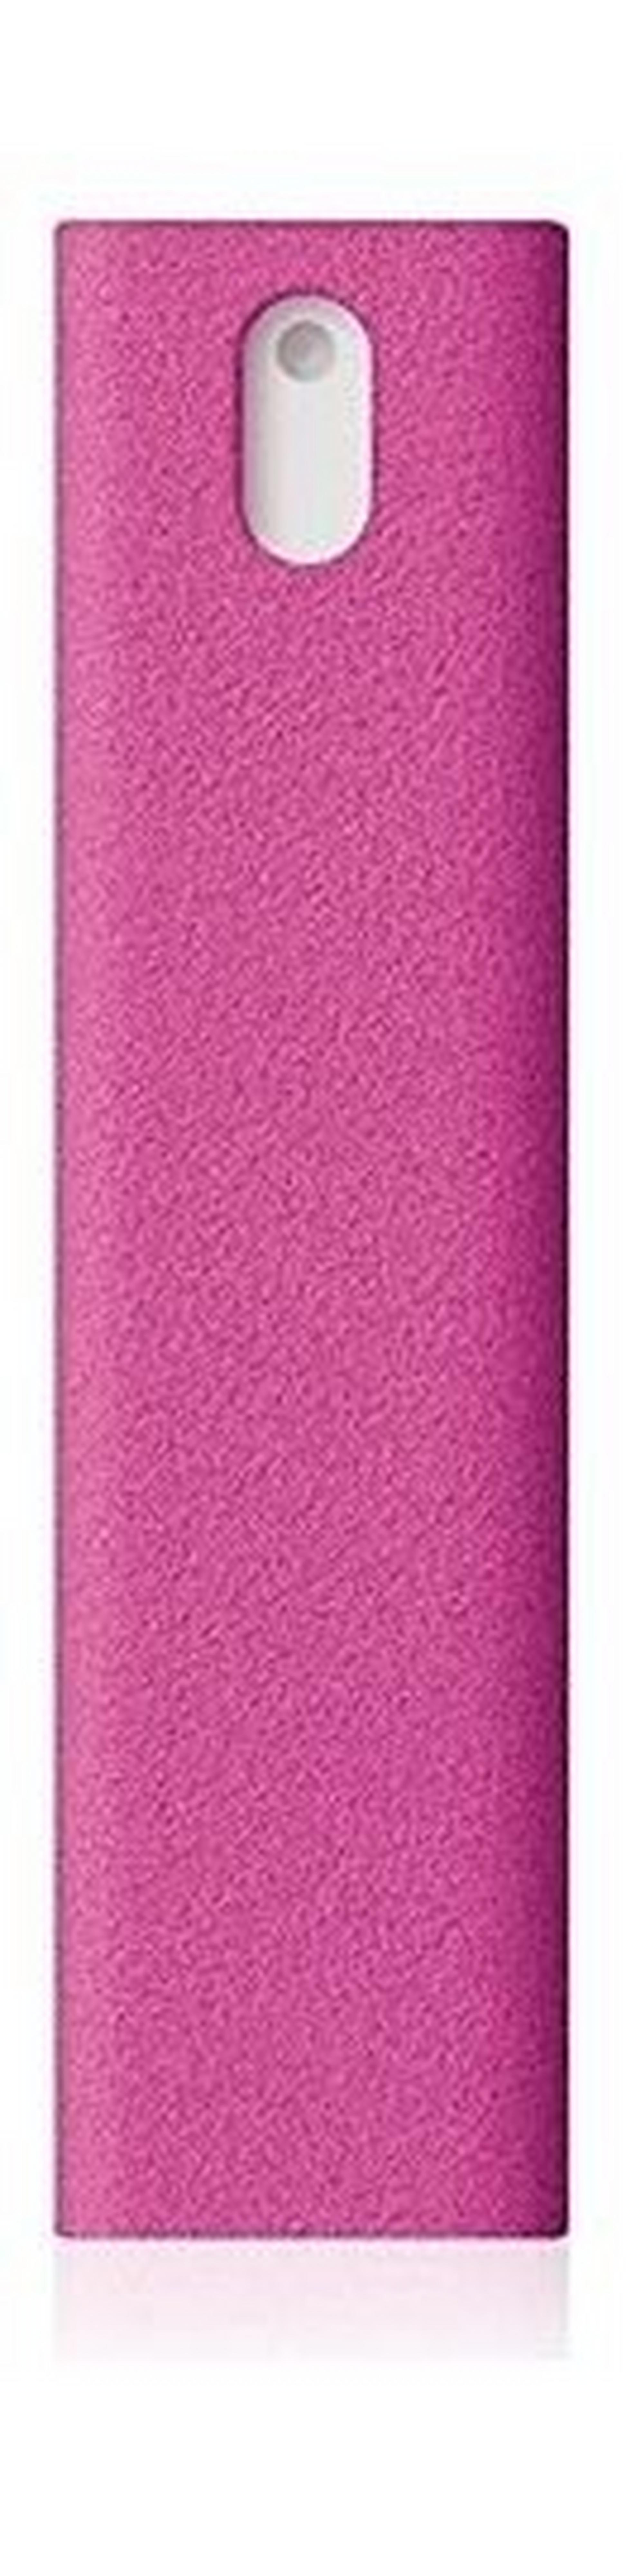 AM Mist 2-in-1 Screen Cleaning Spray 10.5ml (85513-12) - Pink